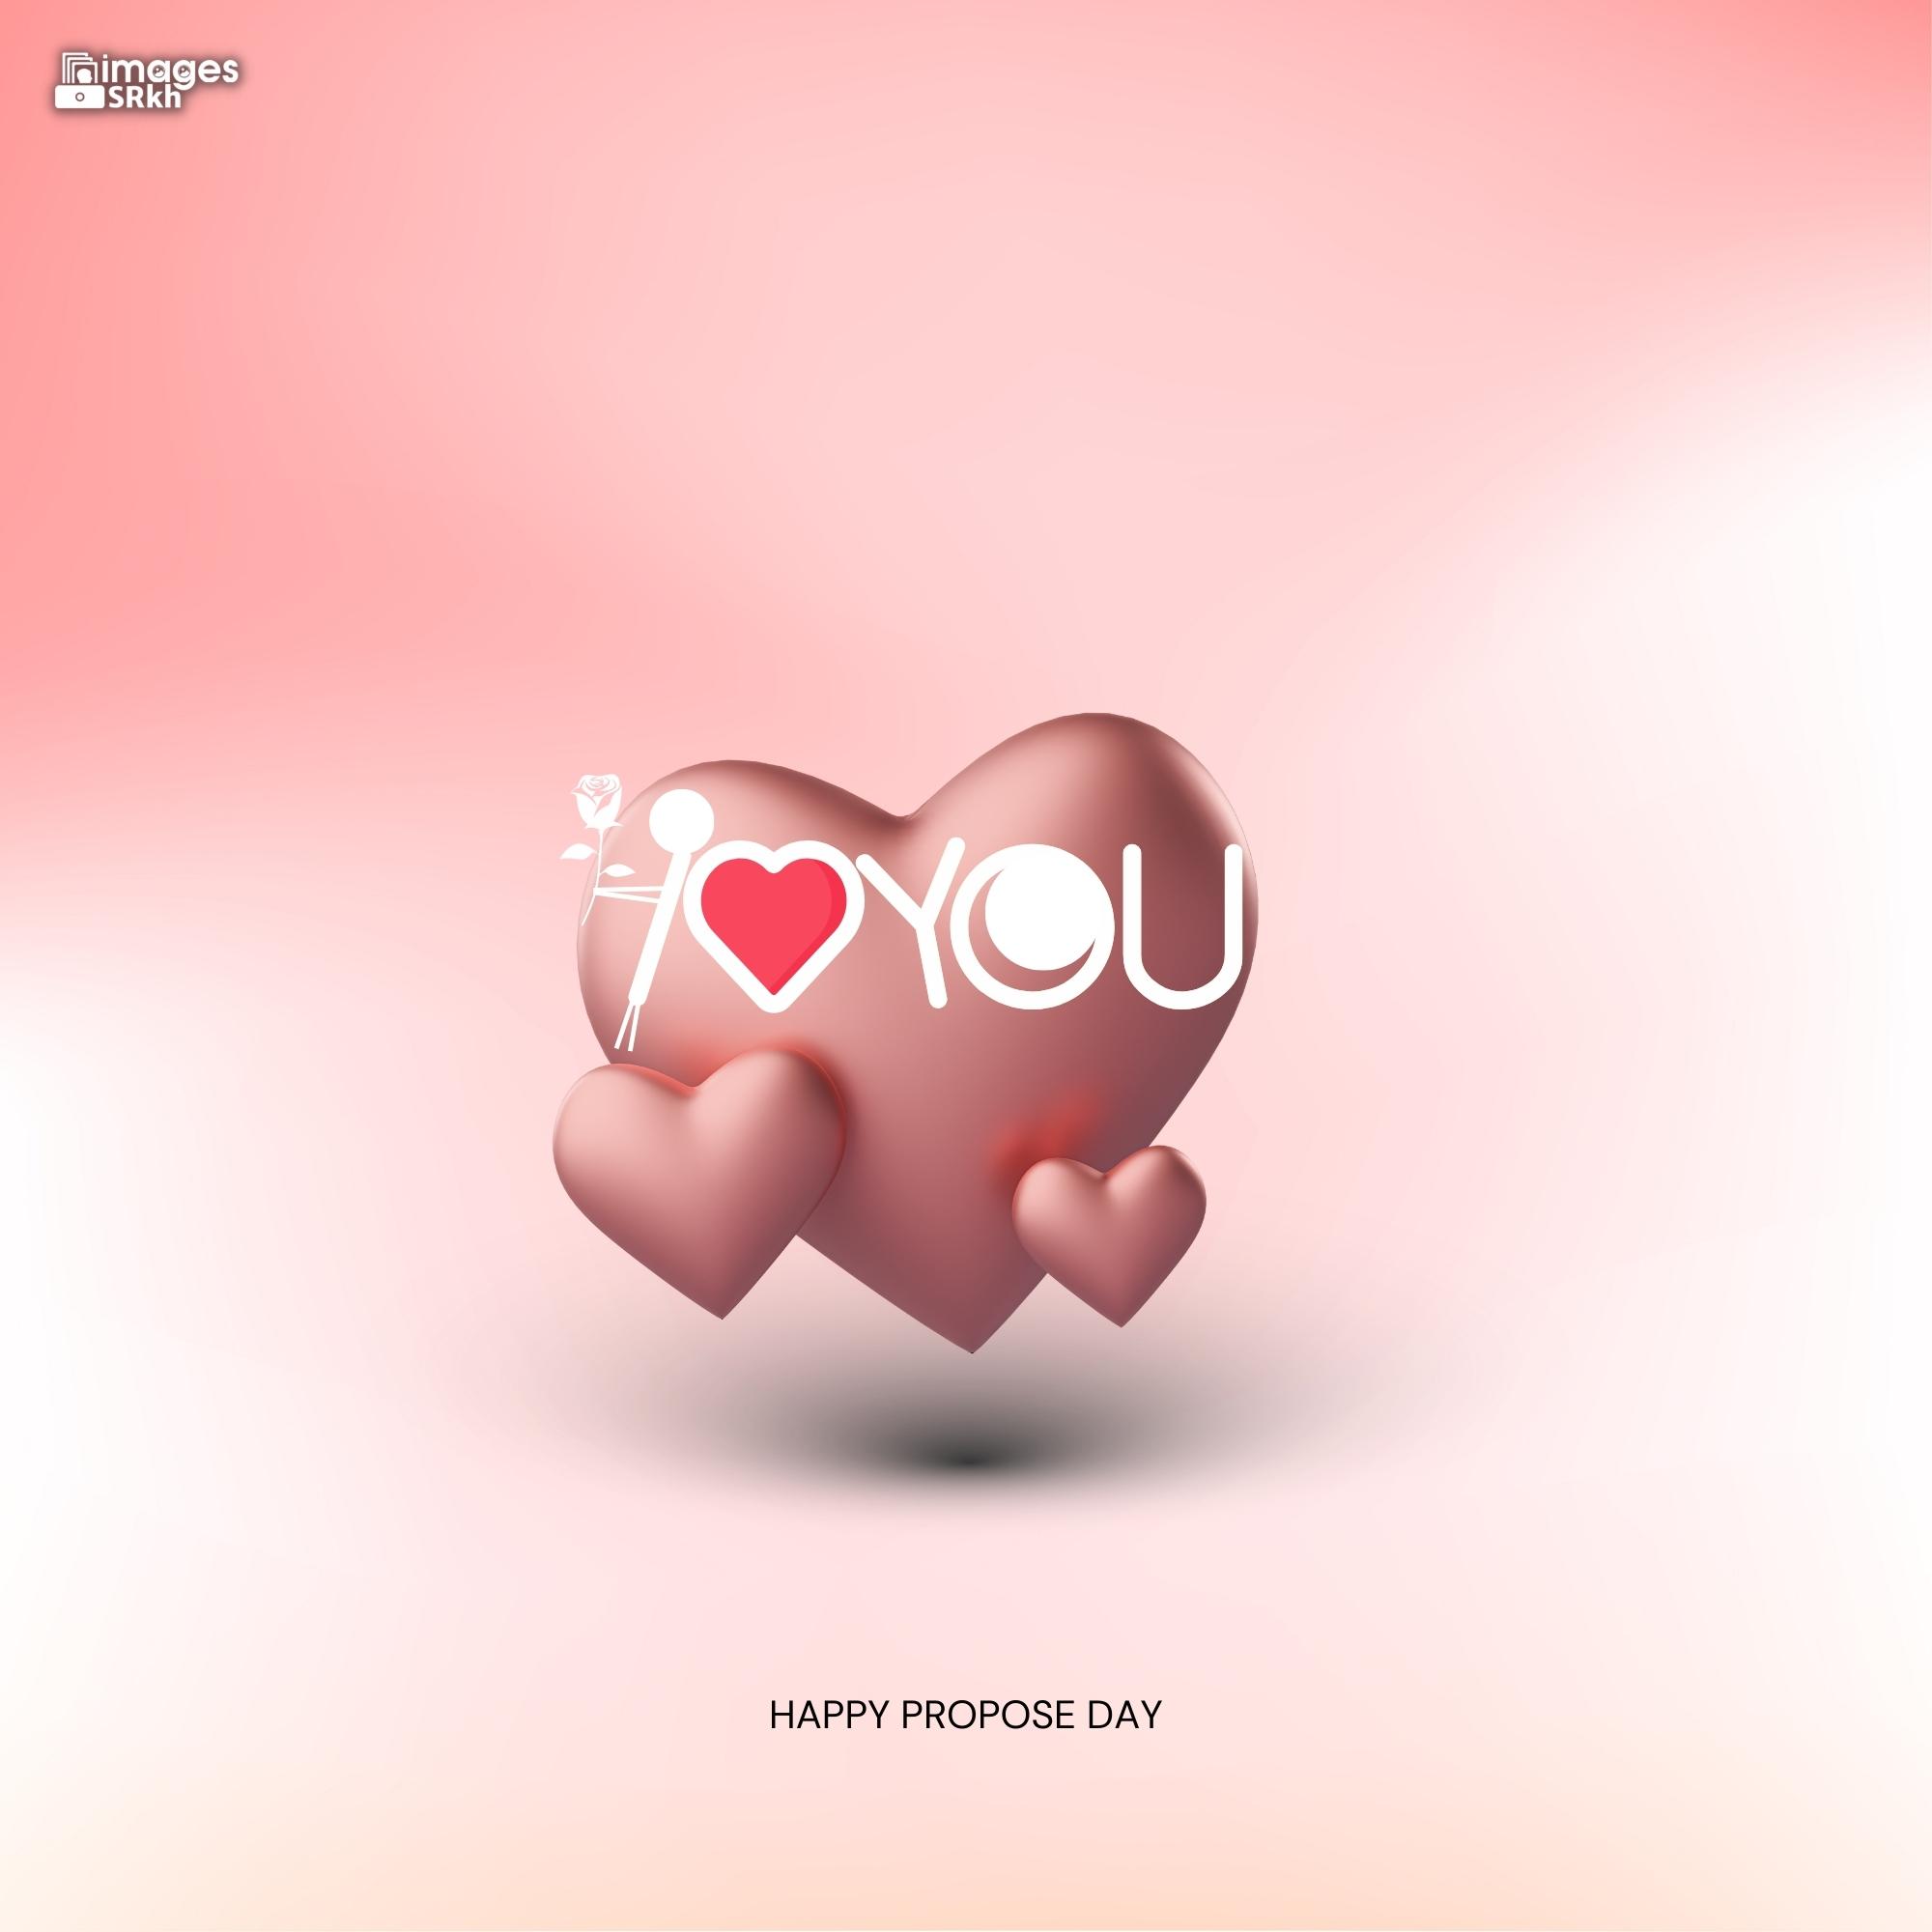 Happy Propose Day Images | 388 | I LOVE YOU